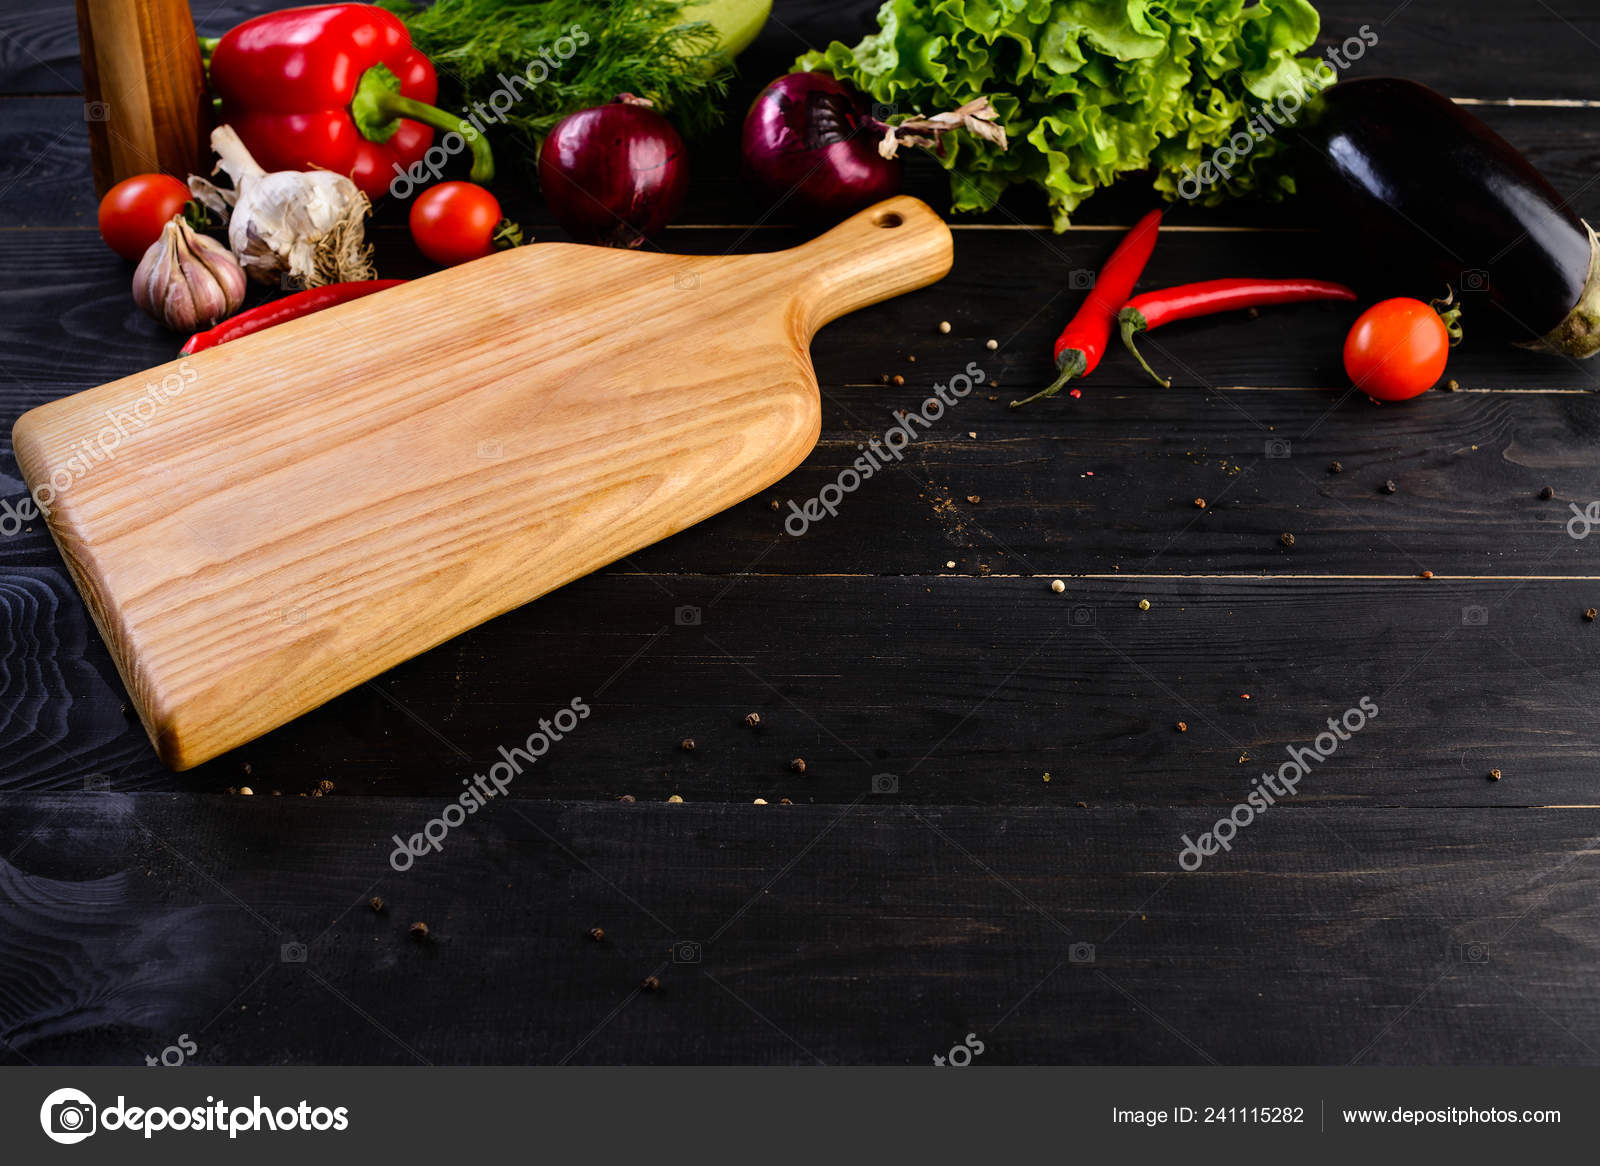 Download Empty Wooden Board Mockup Fresh Vegetables Wooden Black Background Stock Photo C Smspsy 241115282